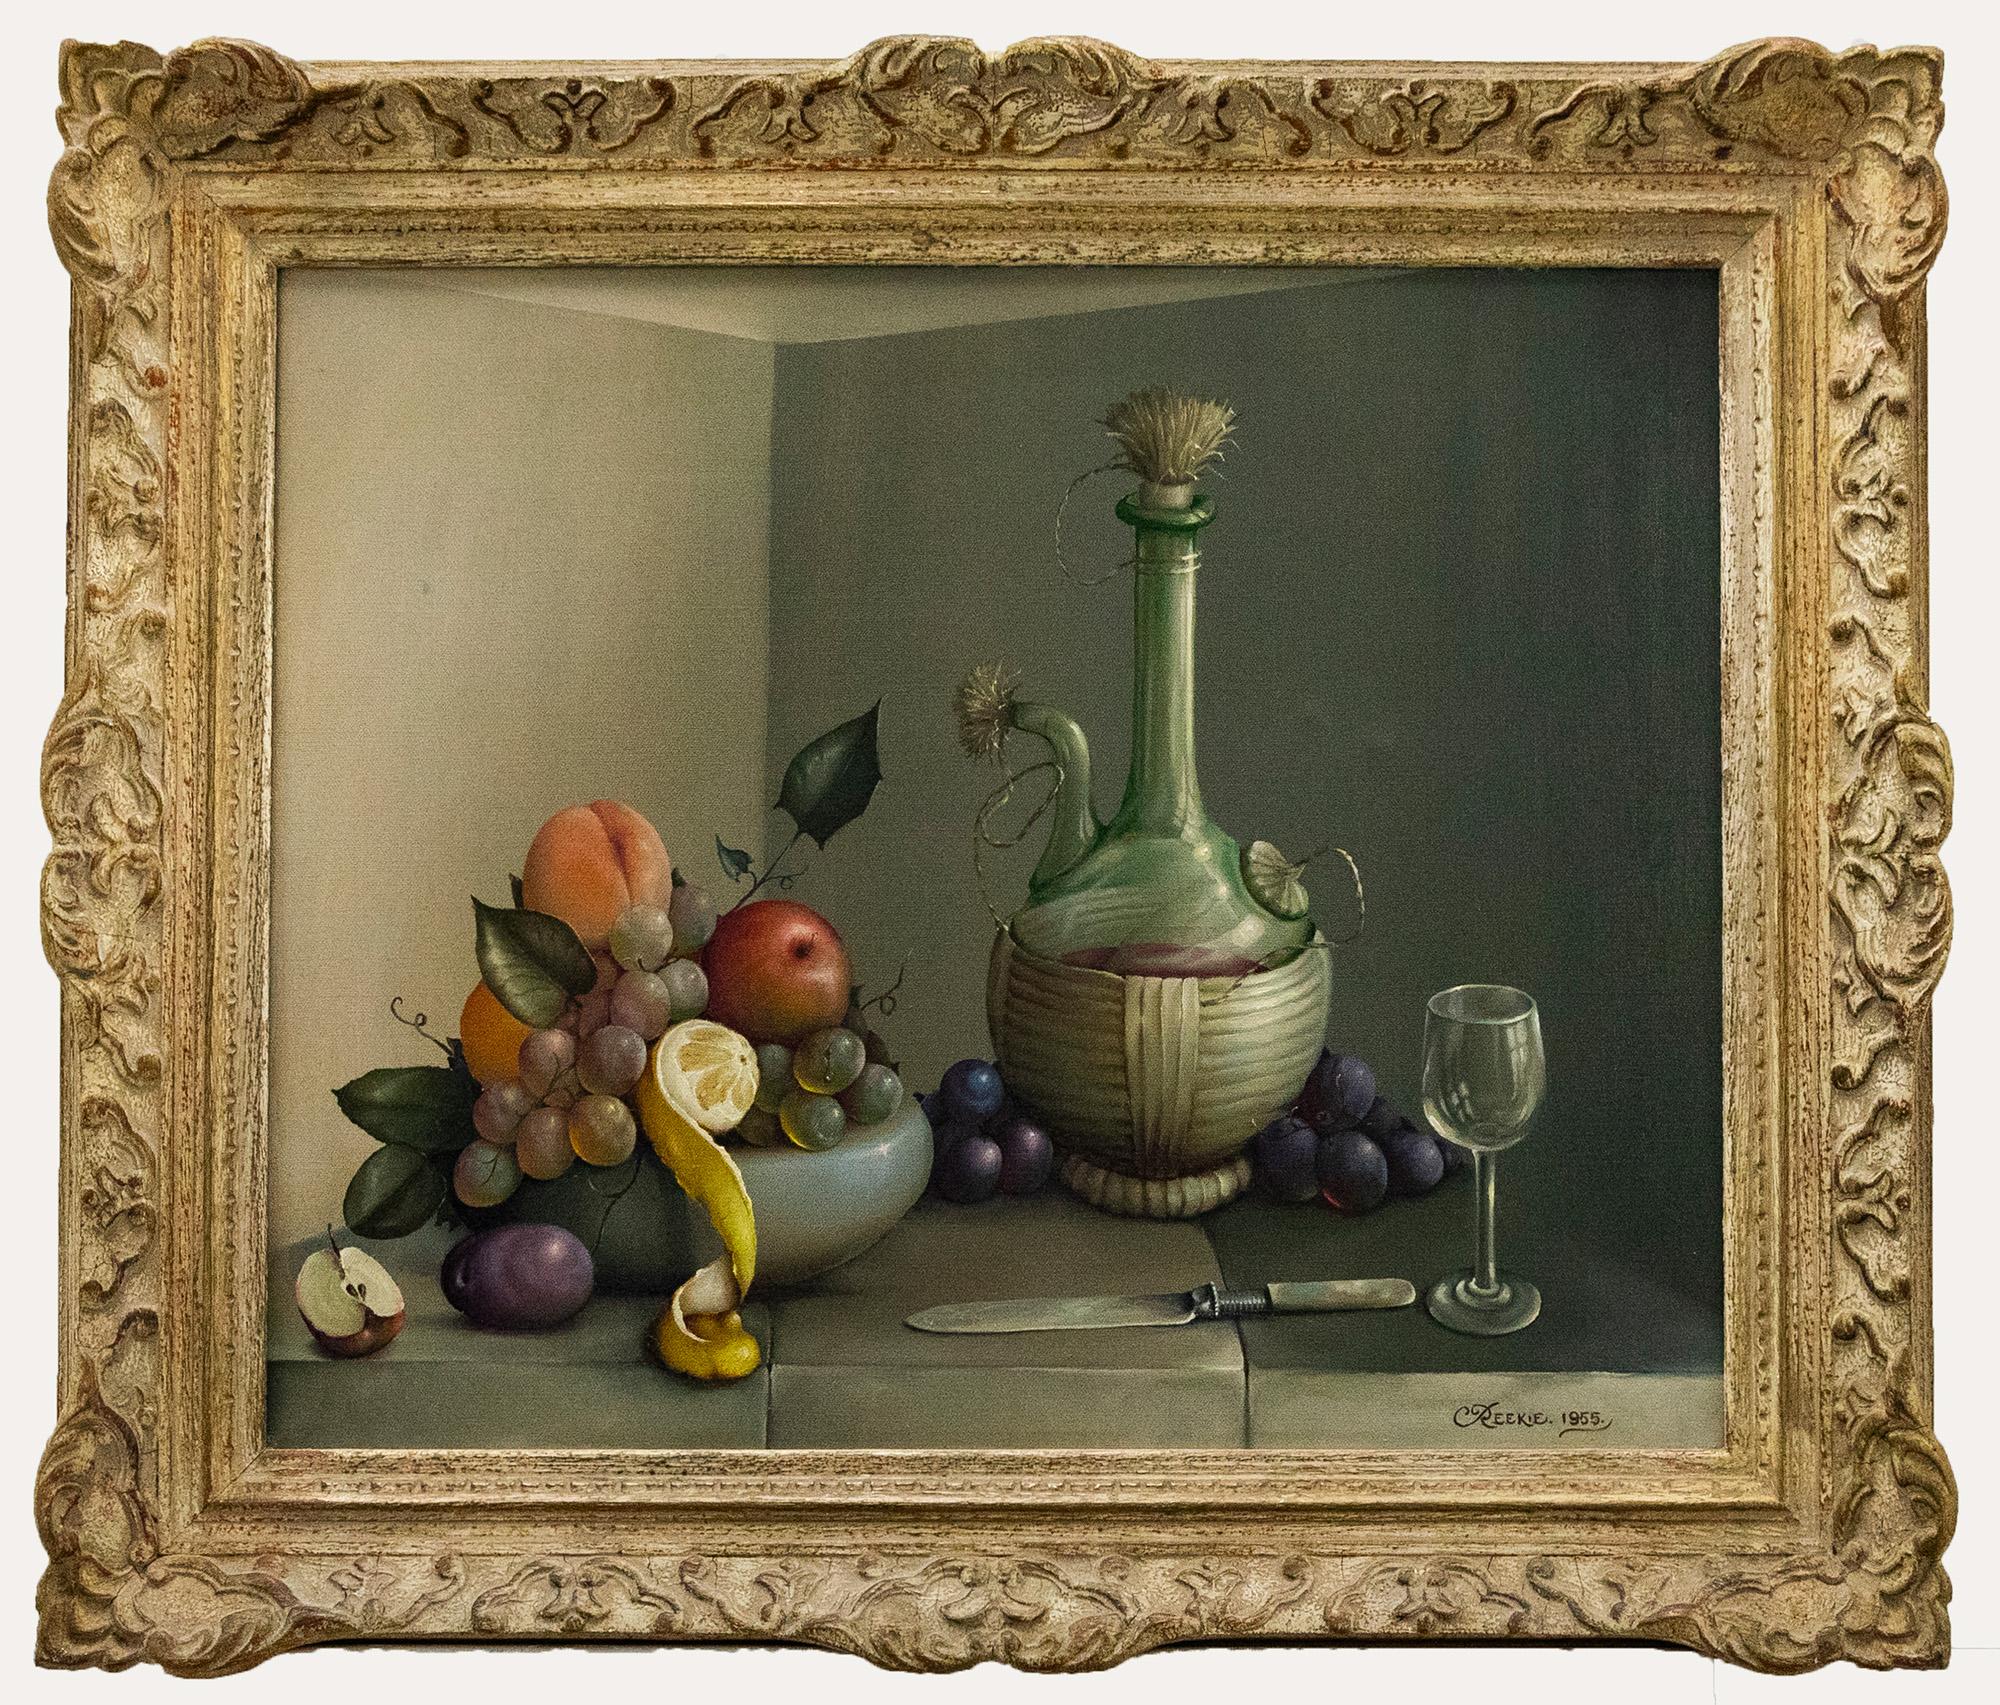 Unknown Still-Life Painting - George Reekie (1911-1969) - Framed 1955 Oil, Fiasco Bottle with Fruit